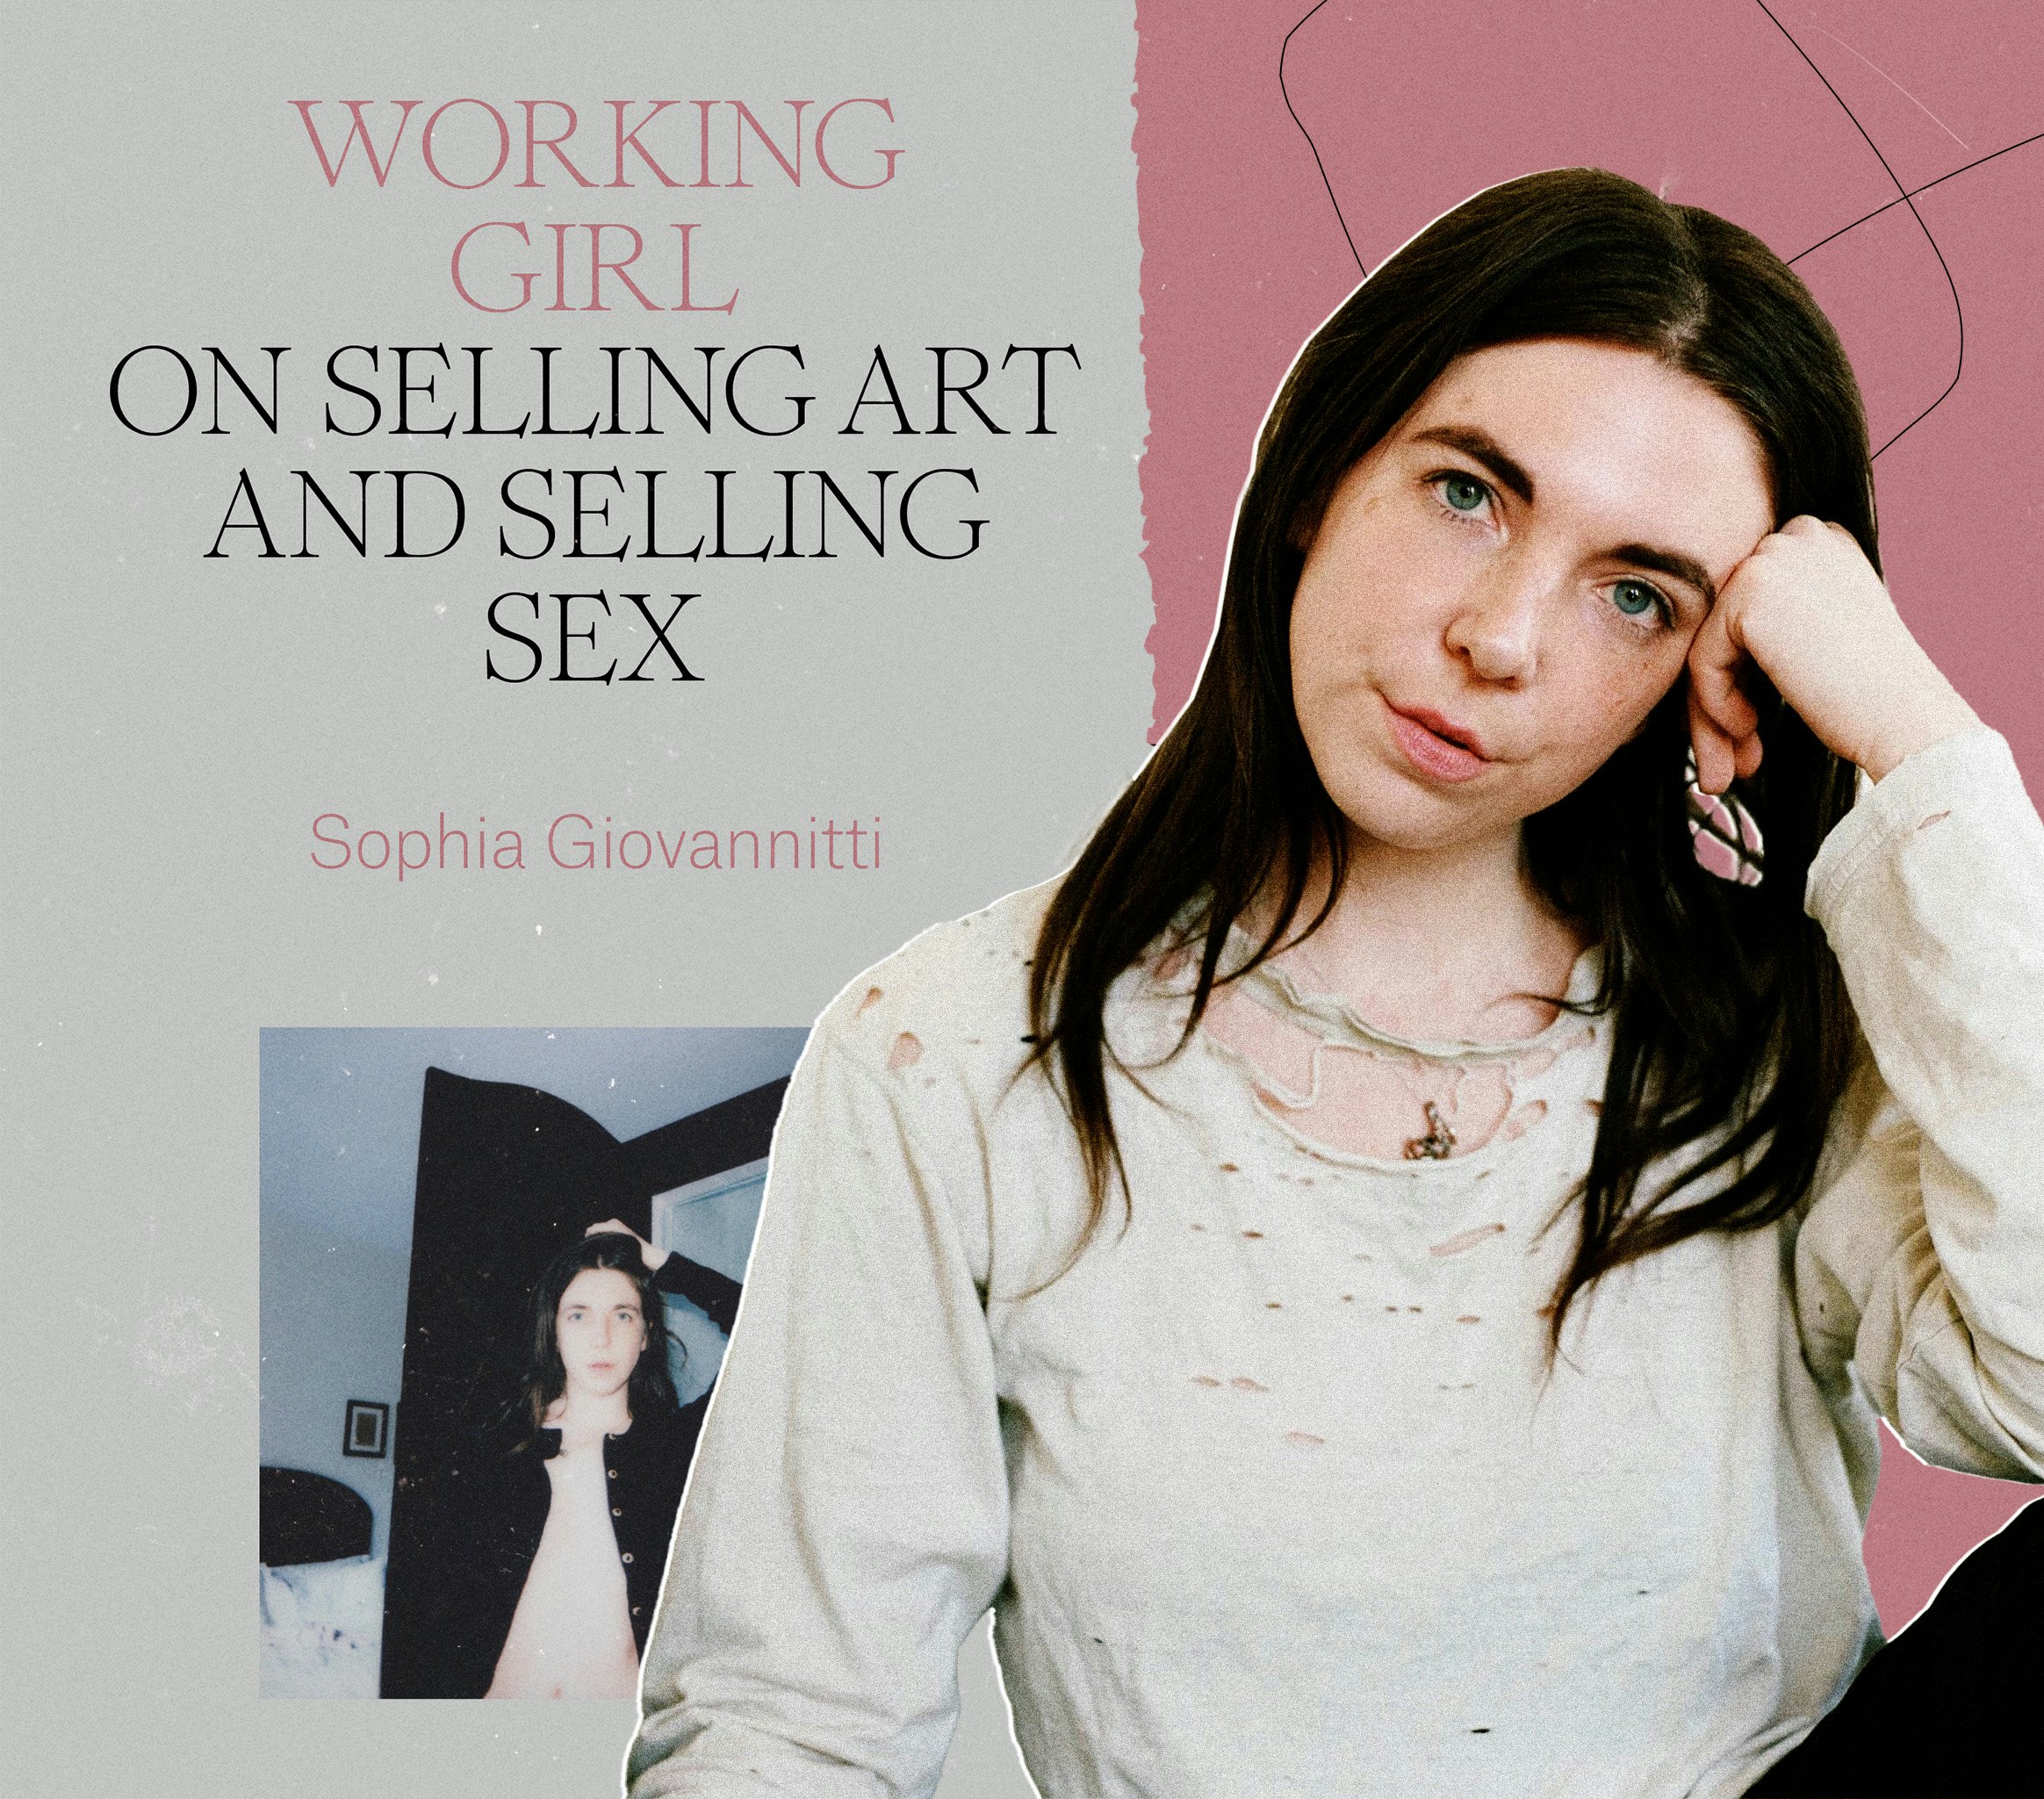 Working Girl Author Sophia Giovannitti Dreams of Doing Exactly As She Wants pic photo